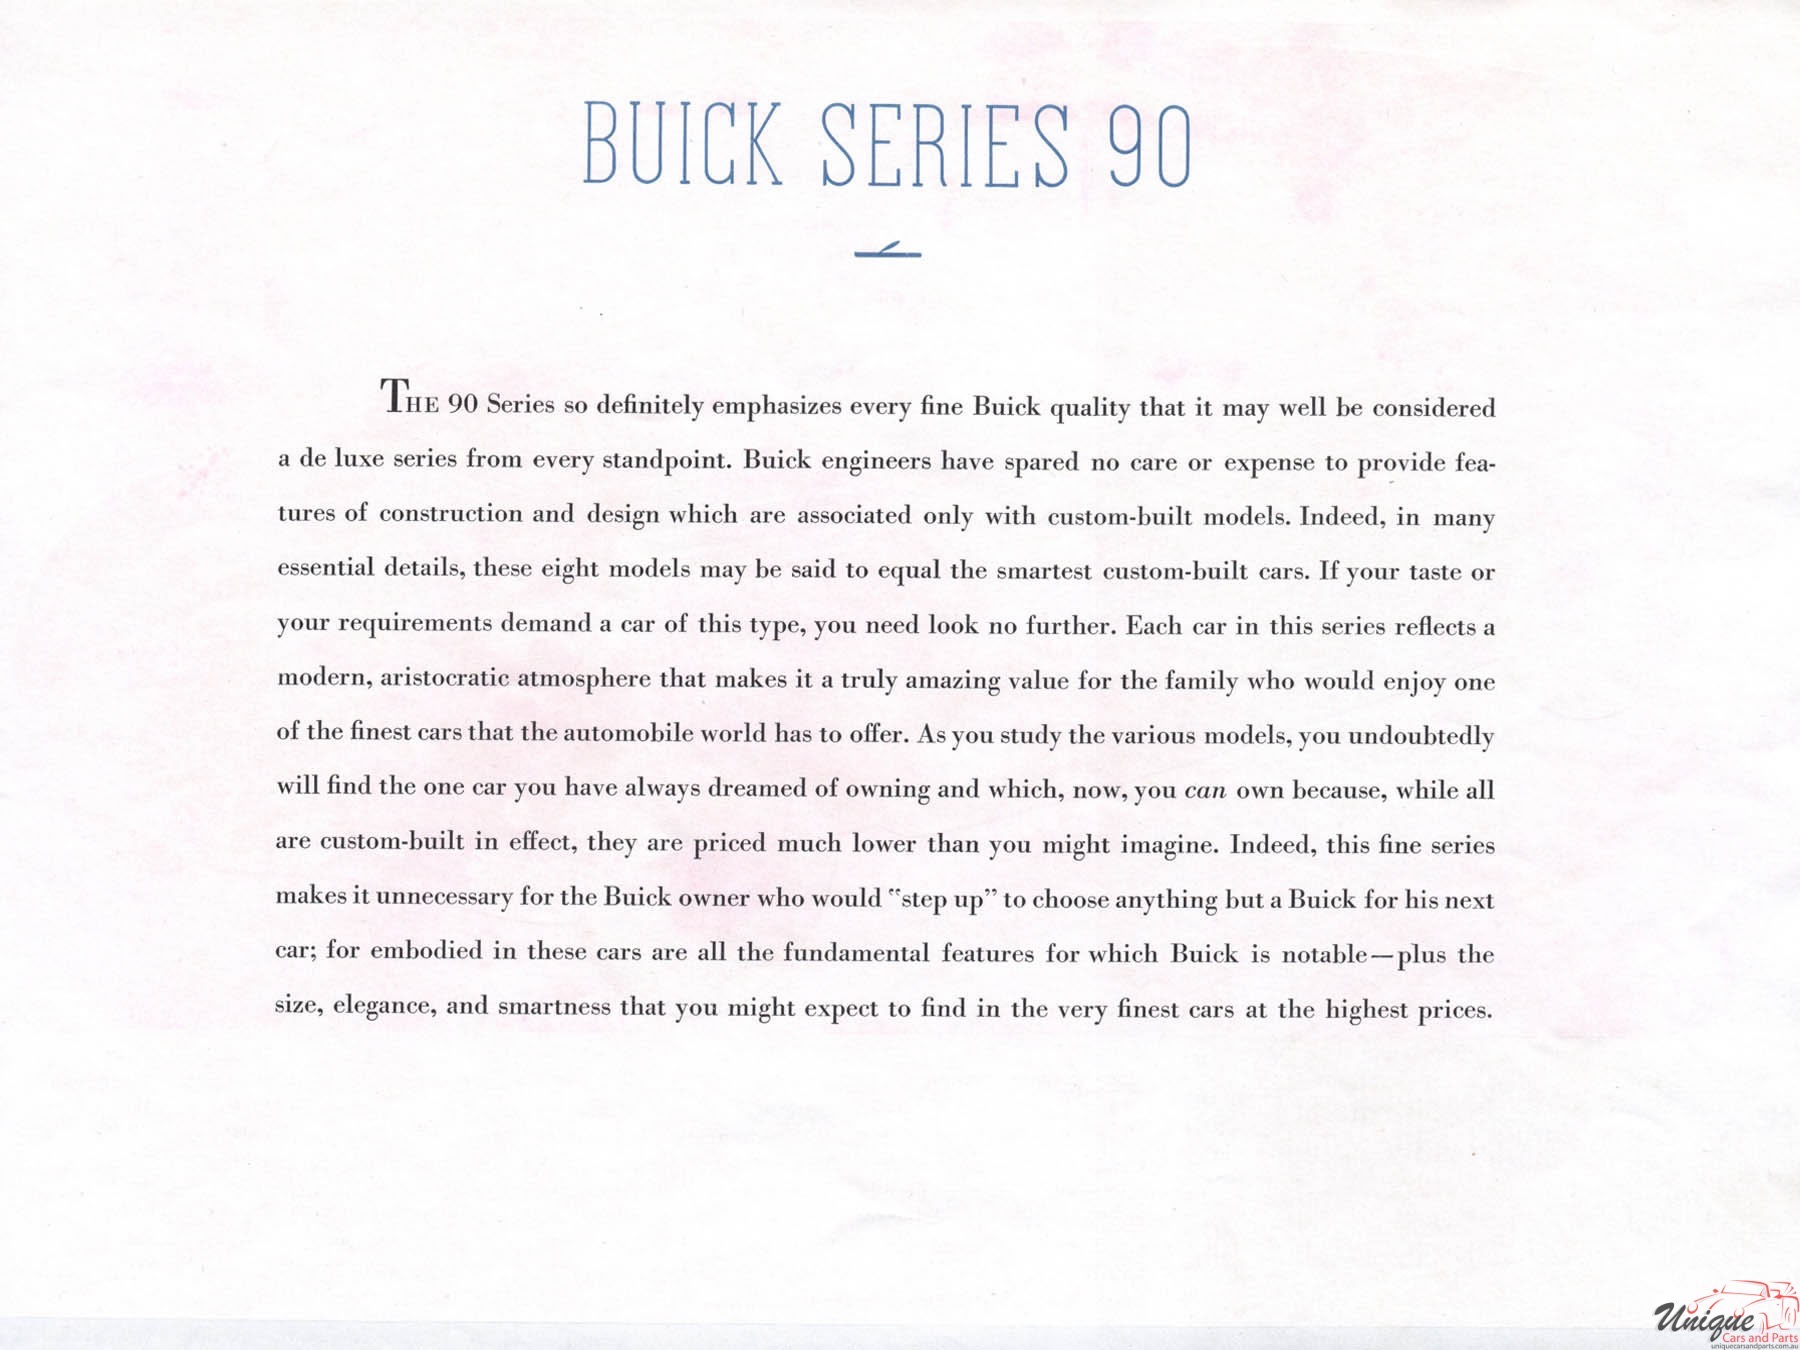 1935 Buick Brochure Page 33